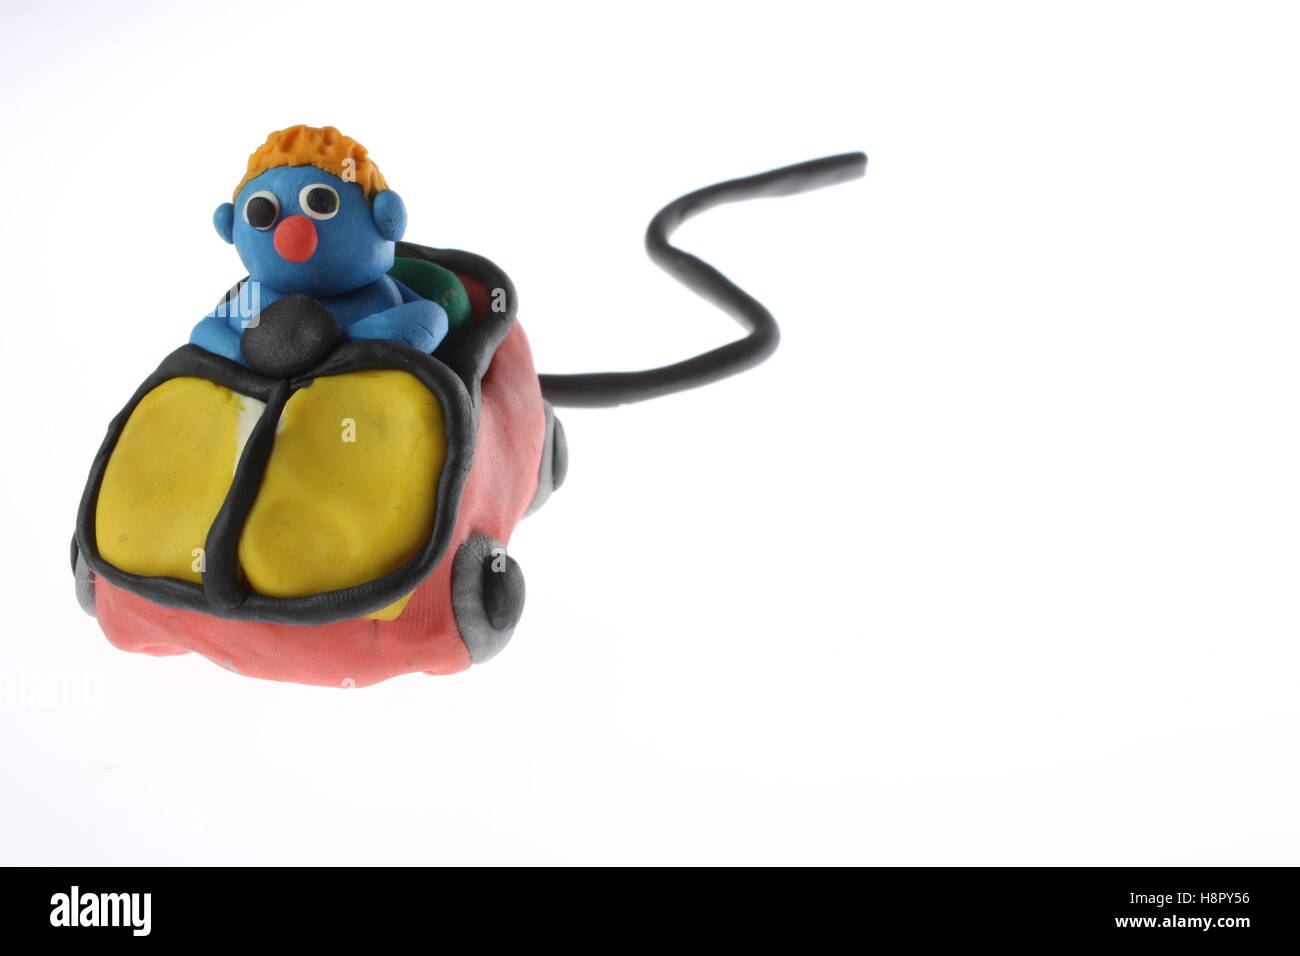 Play doh model of a man driving a computer mouse ideal logo imagery for car insurance / cover comparison company Stock Photo